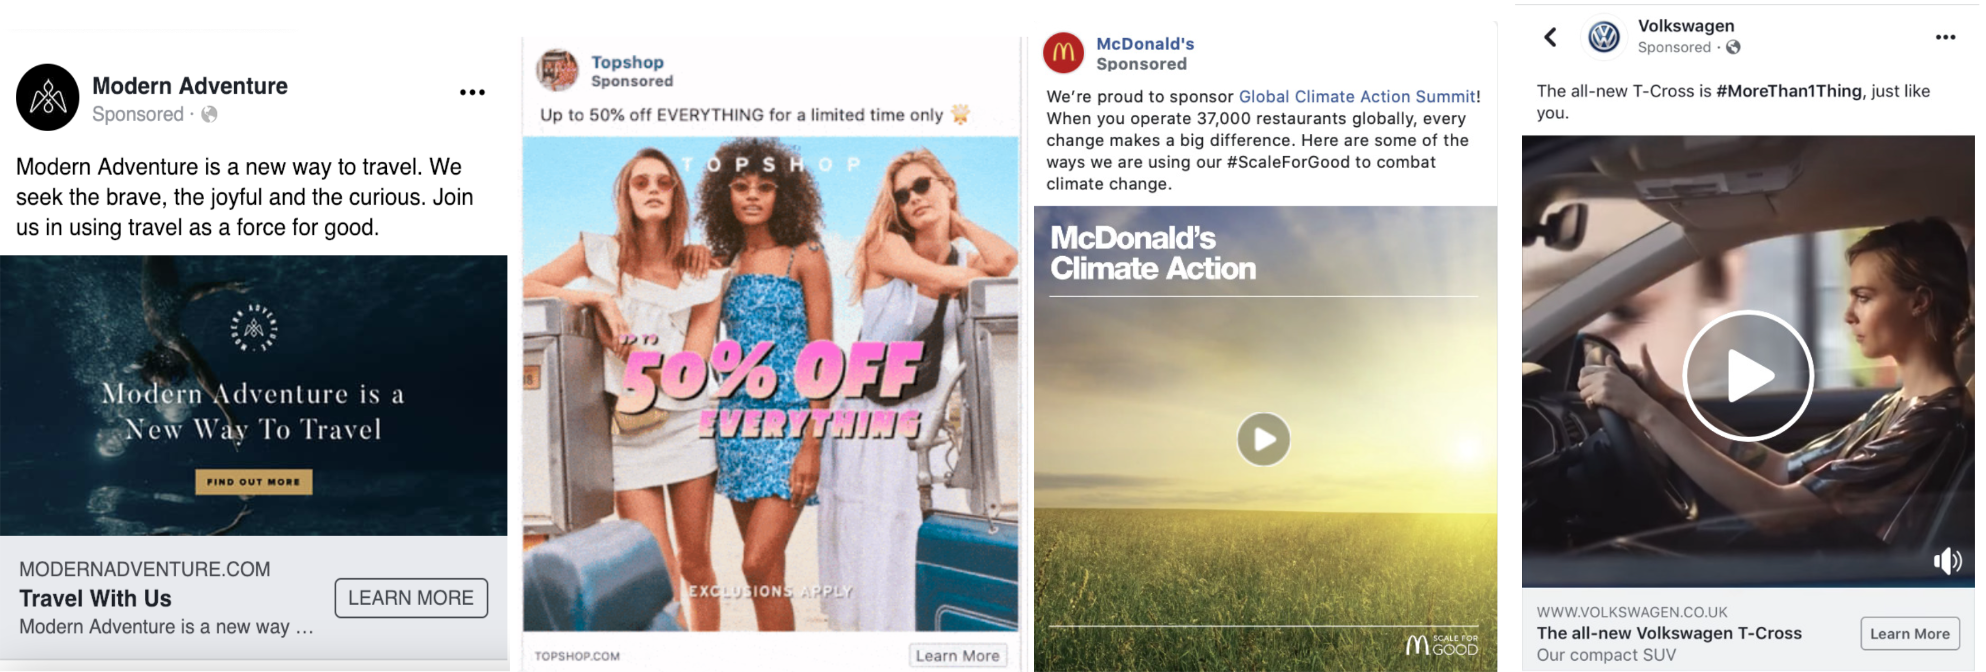 Facebook Awareness objective ad example